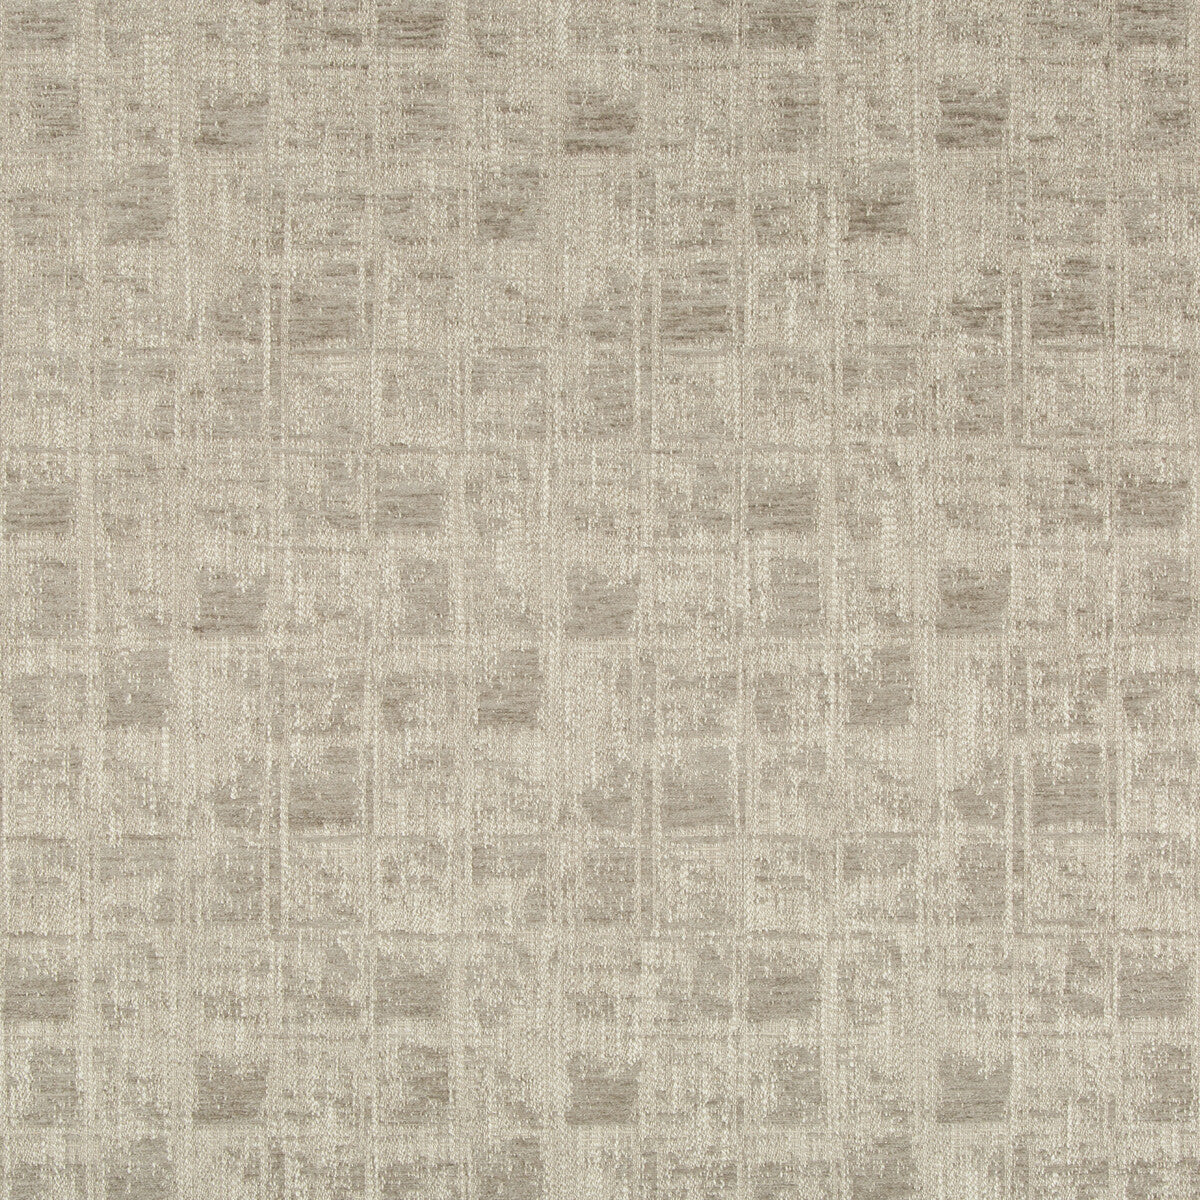 Kravet Couture fabric in 36644-11 color - pattern 36644.11.0 - by Kravet Couture in the Mabley Handler collection